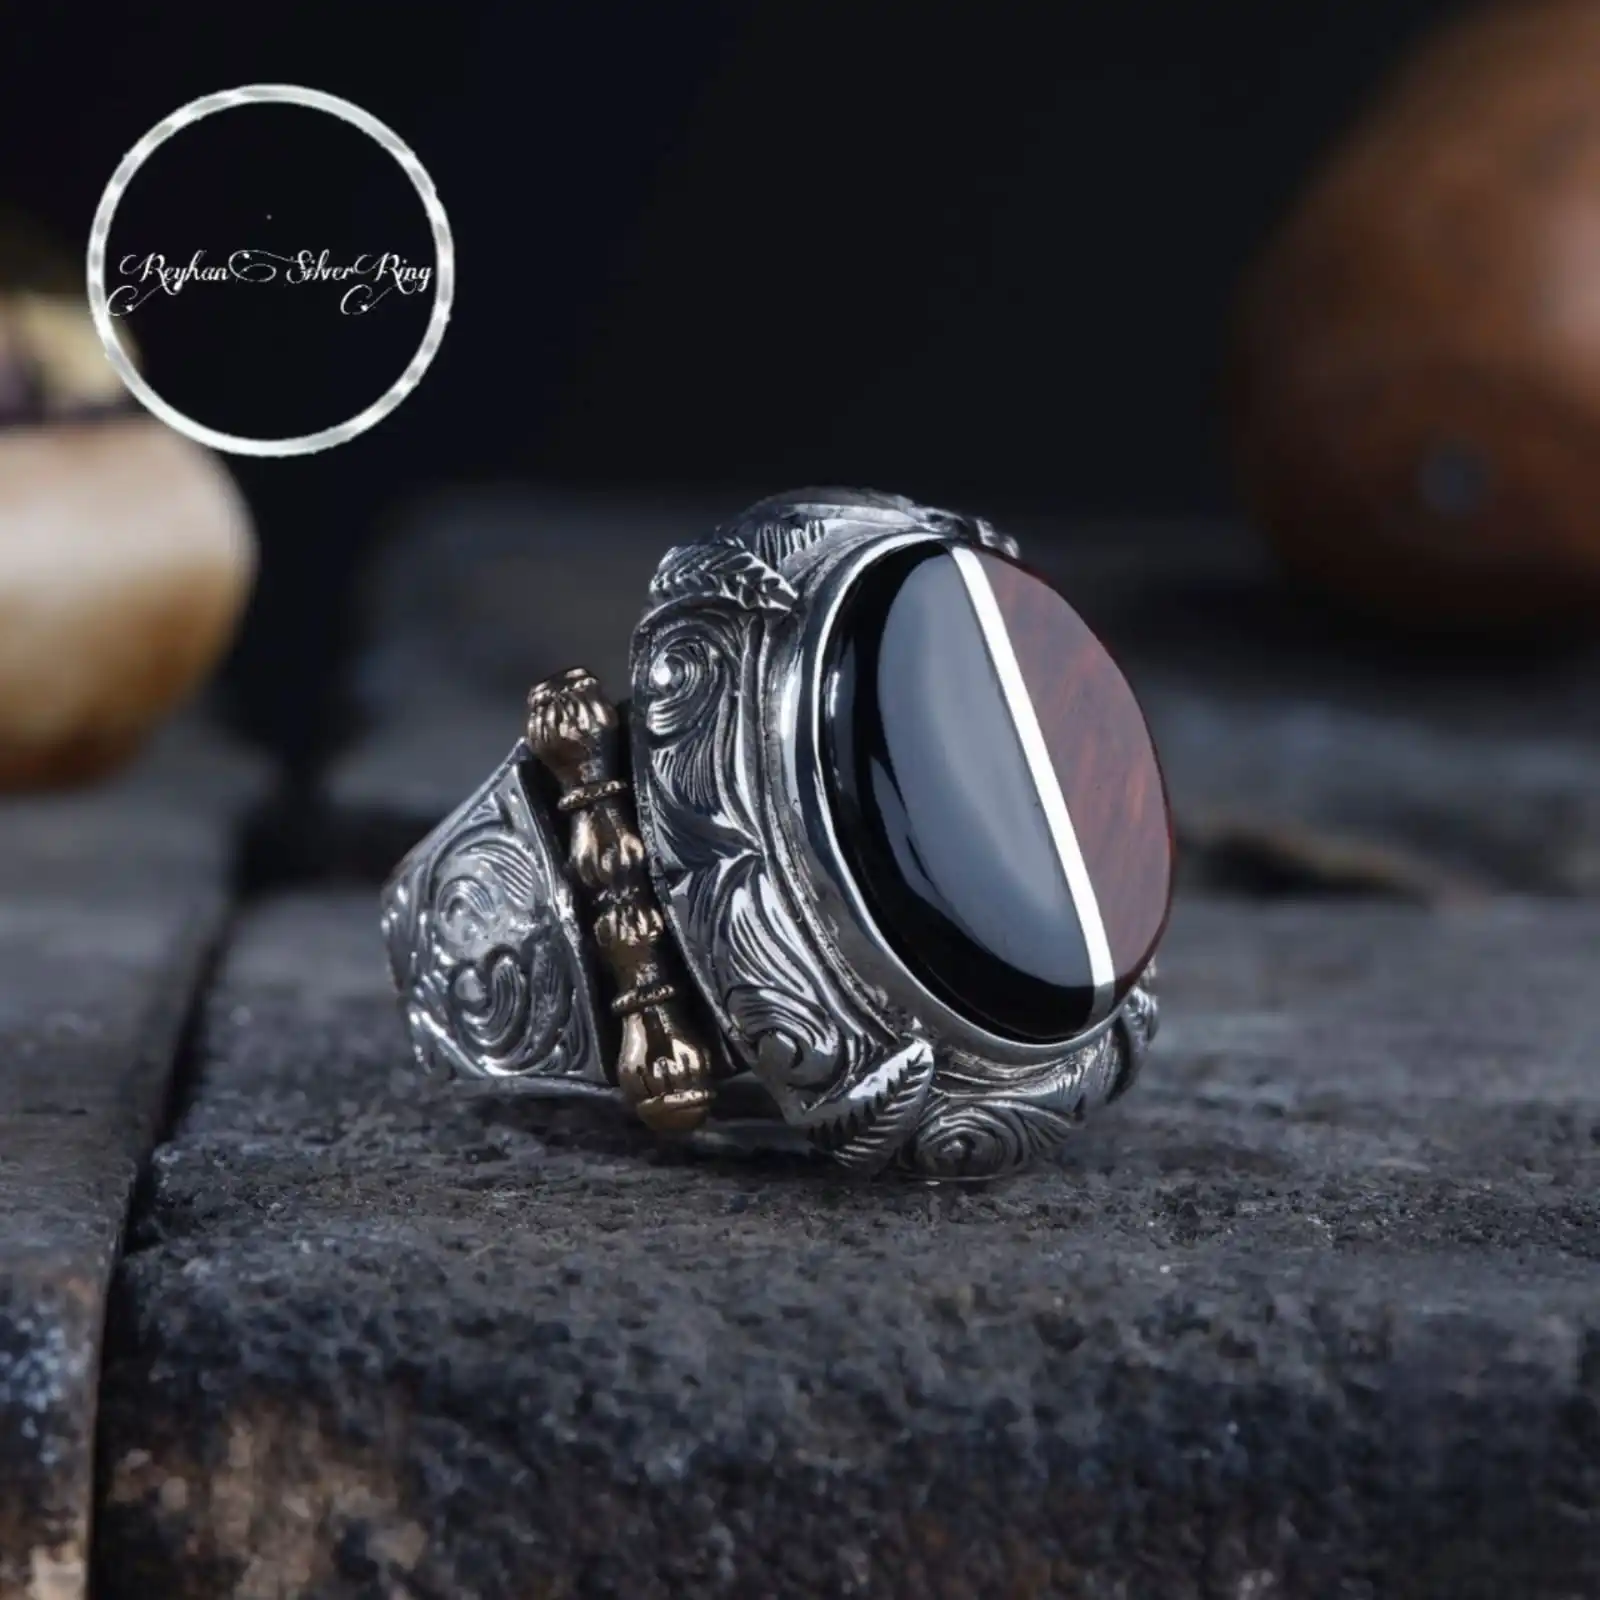 Handcrafted Silver Inlaid Men's Ring with Coca and Oltu Stone - Unique Splitting and Pencil Engraved Design turban model the art of original design and craftsmanship silver men s ring hand carved from katalin stone turban green amber